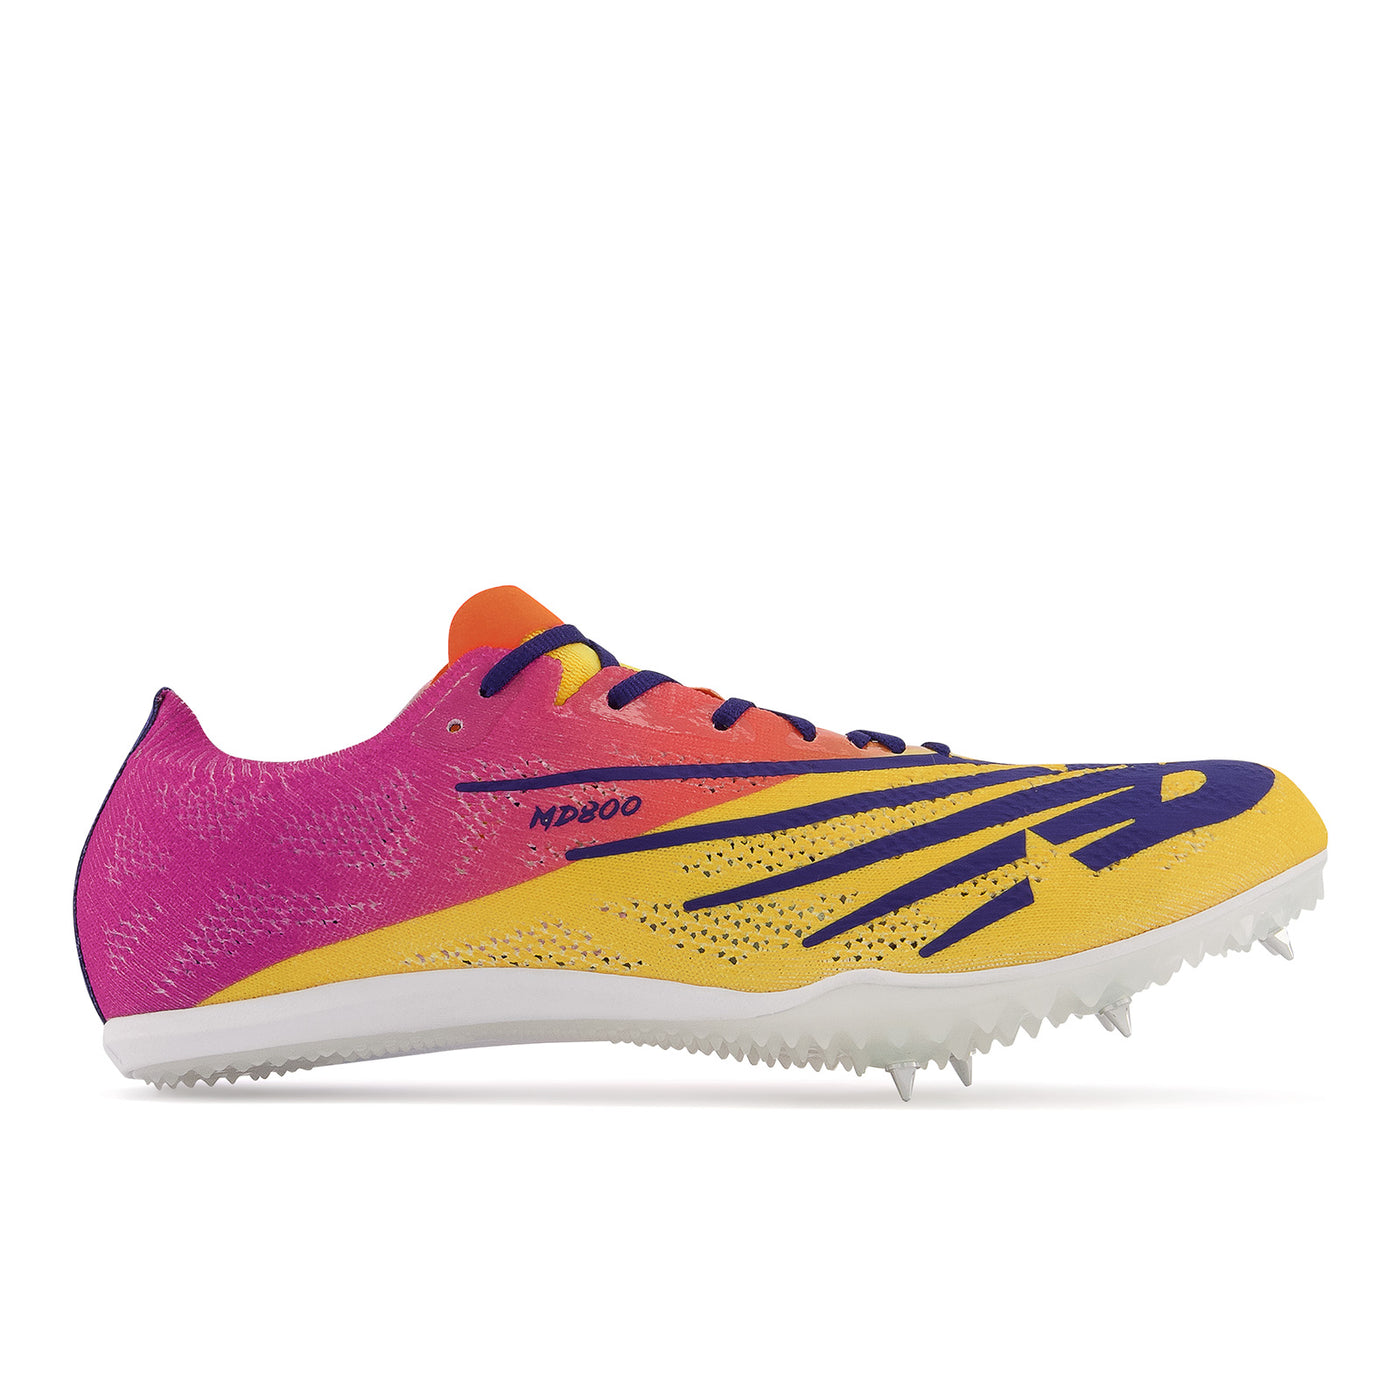 New Balance MD800 8 Middle Distance Spike women's